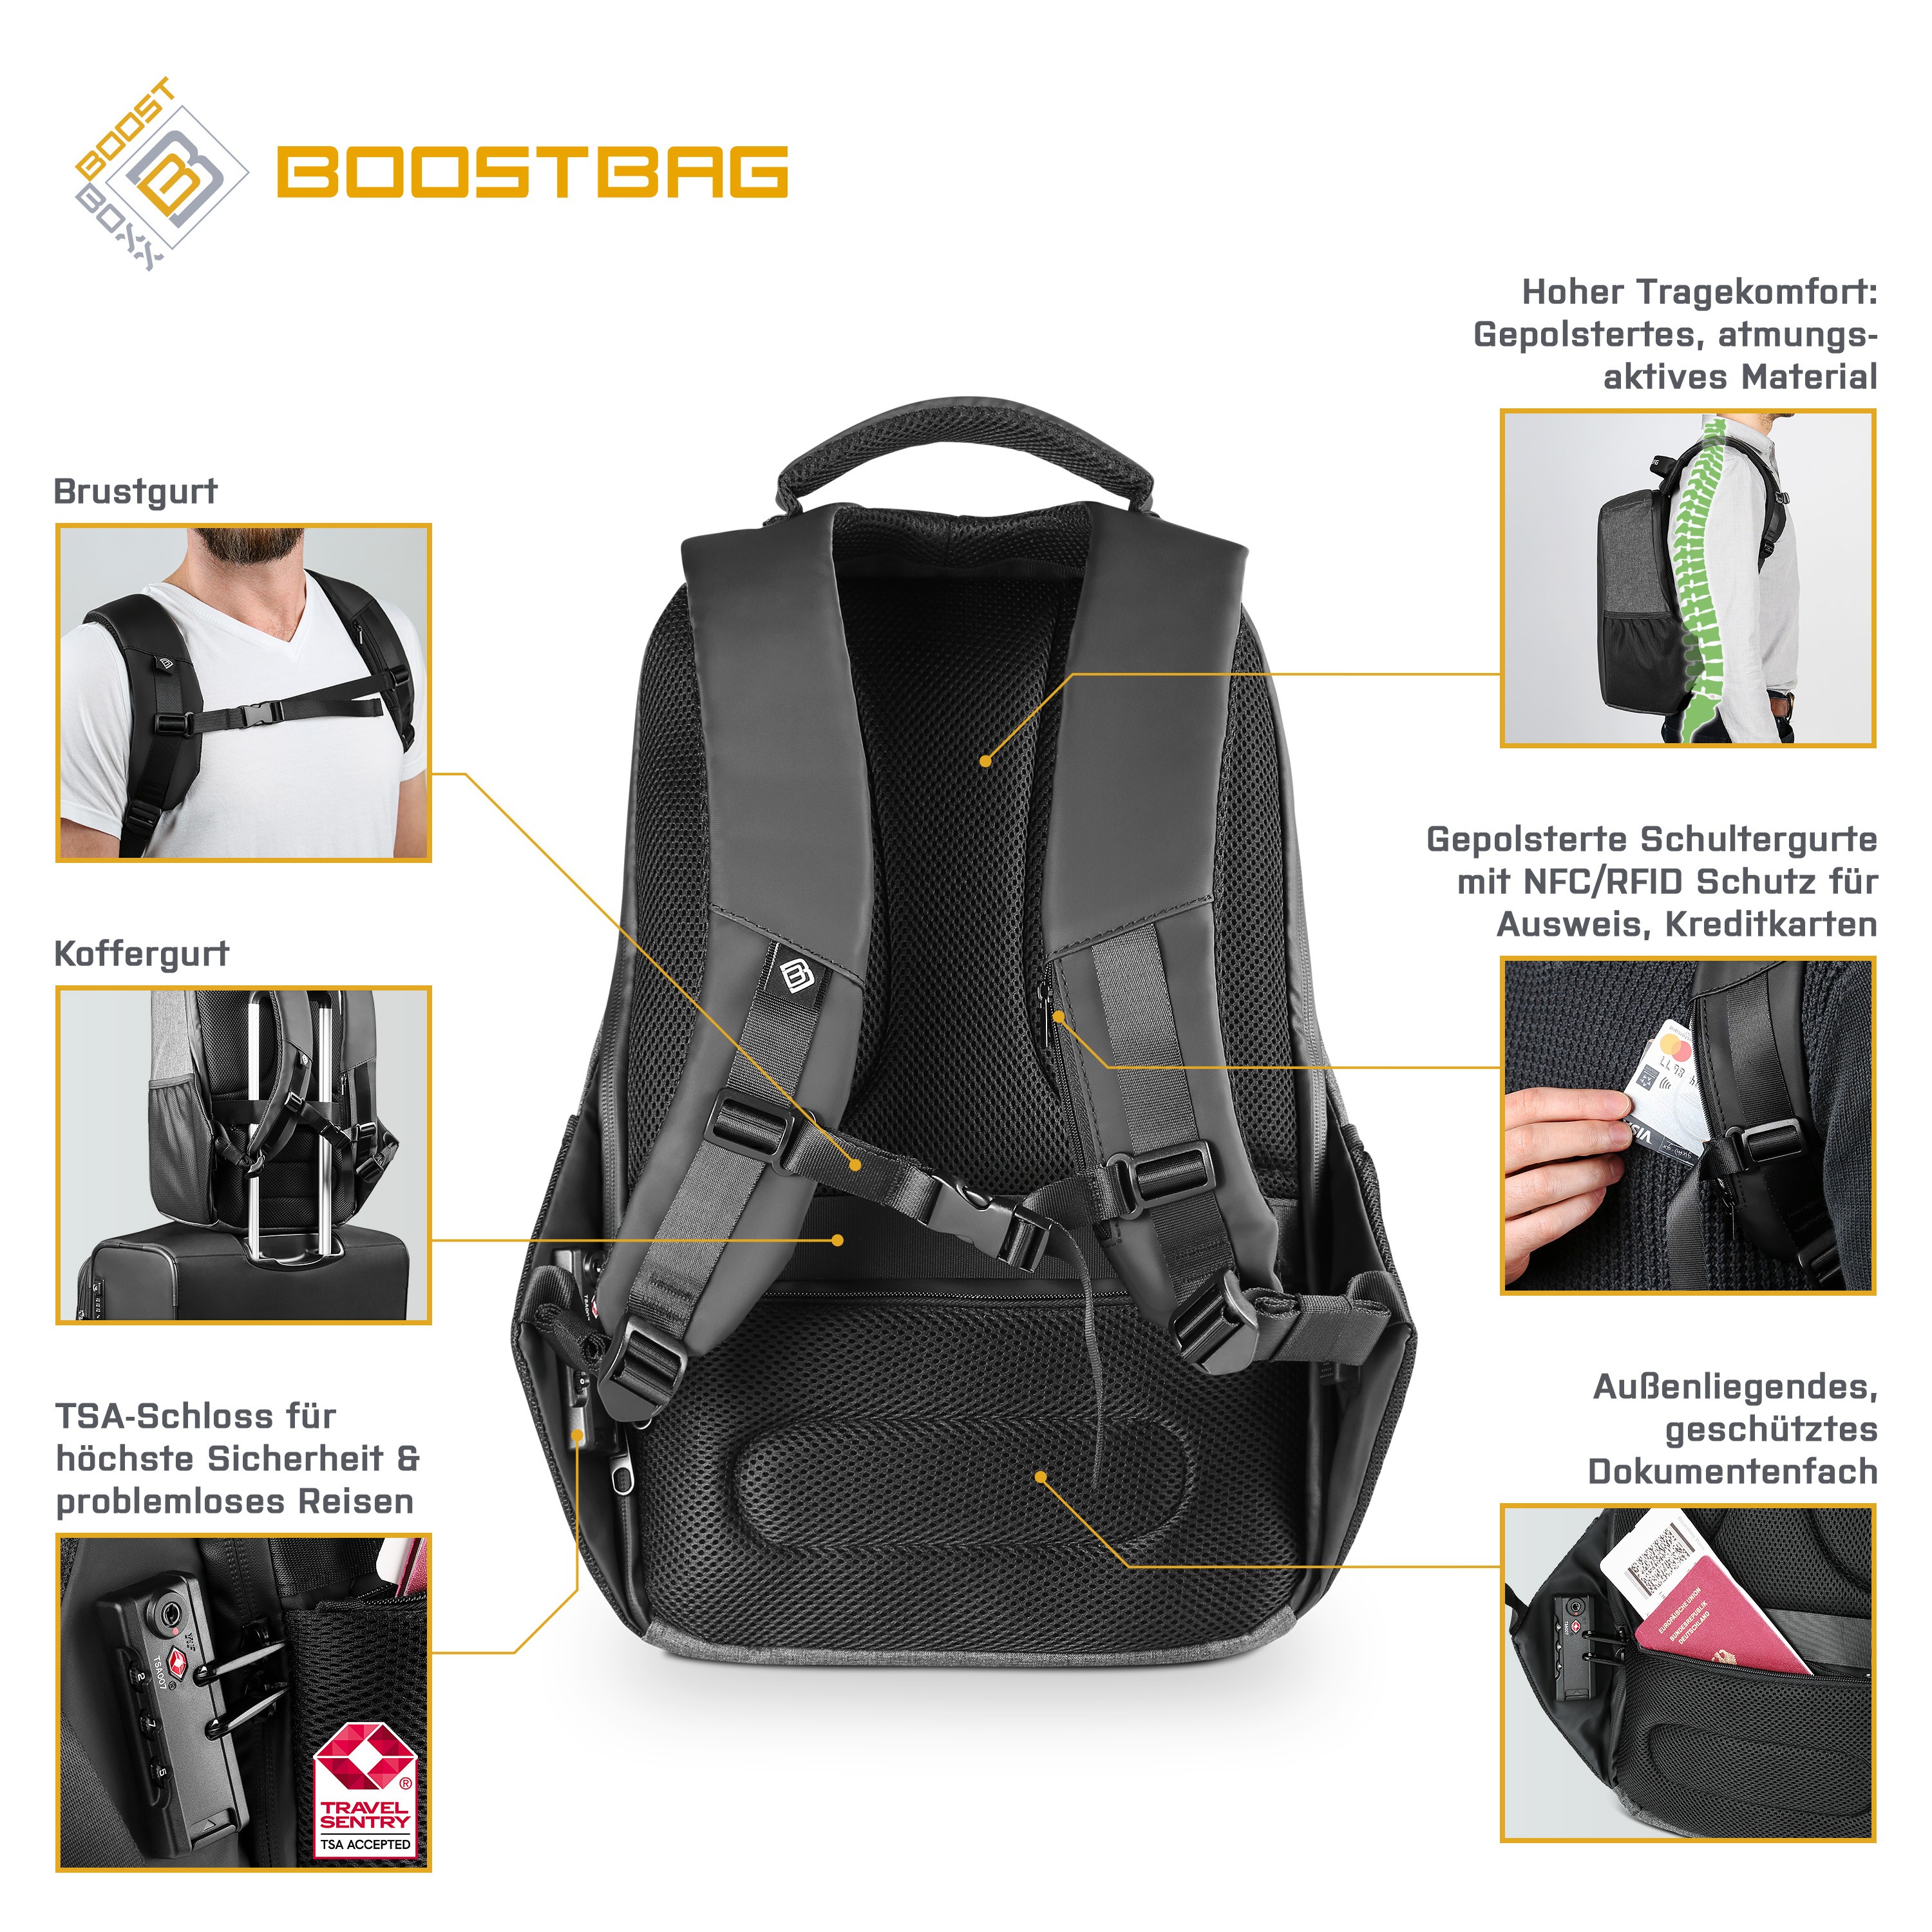 | backpack to CSL up BoostBoxx Computer BoostBag - Notebook